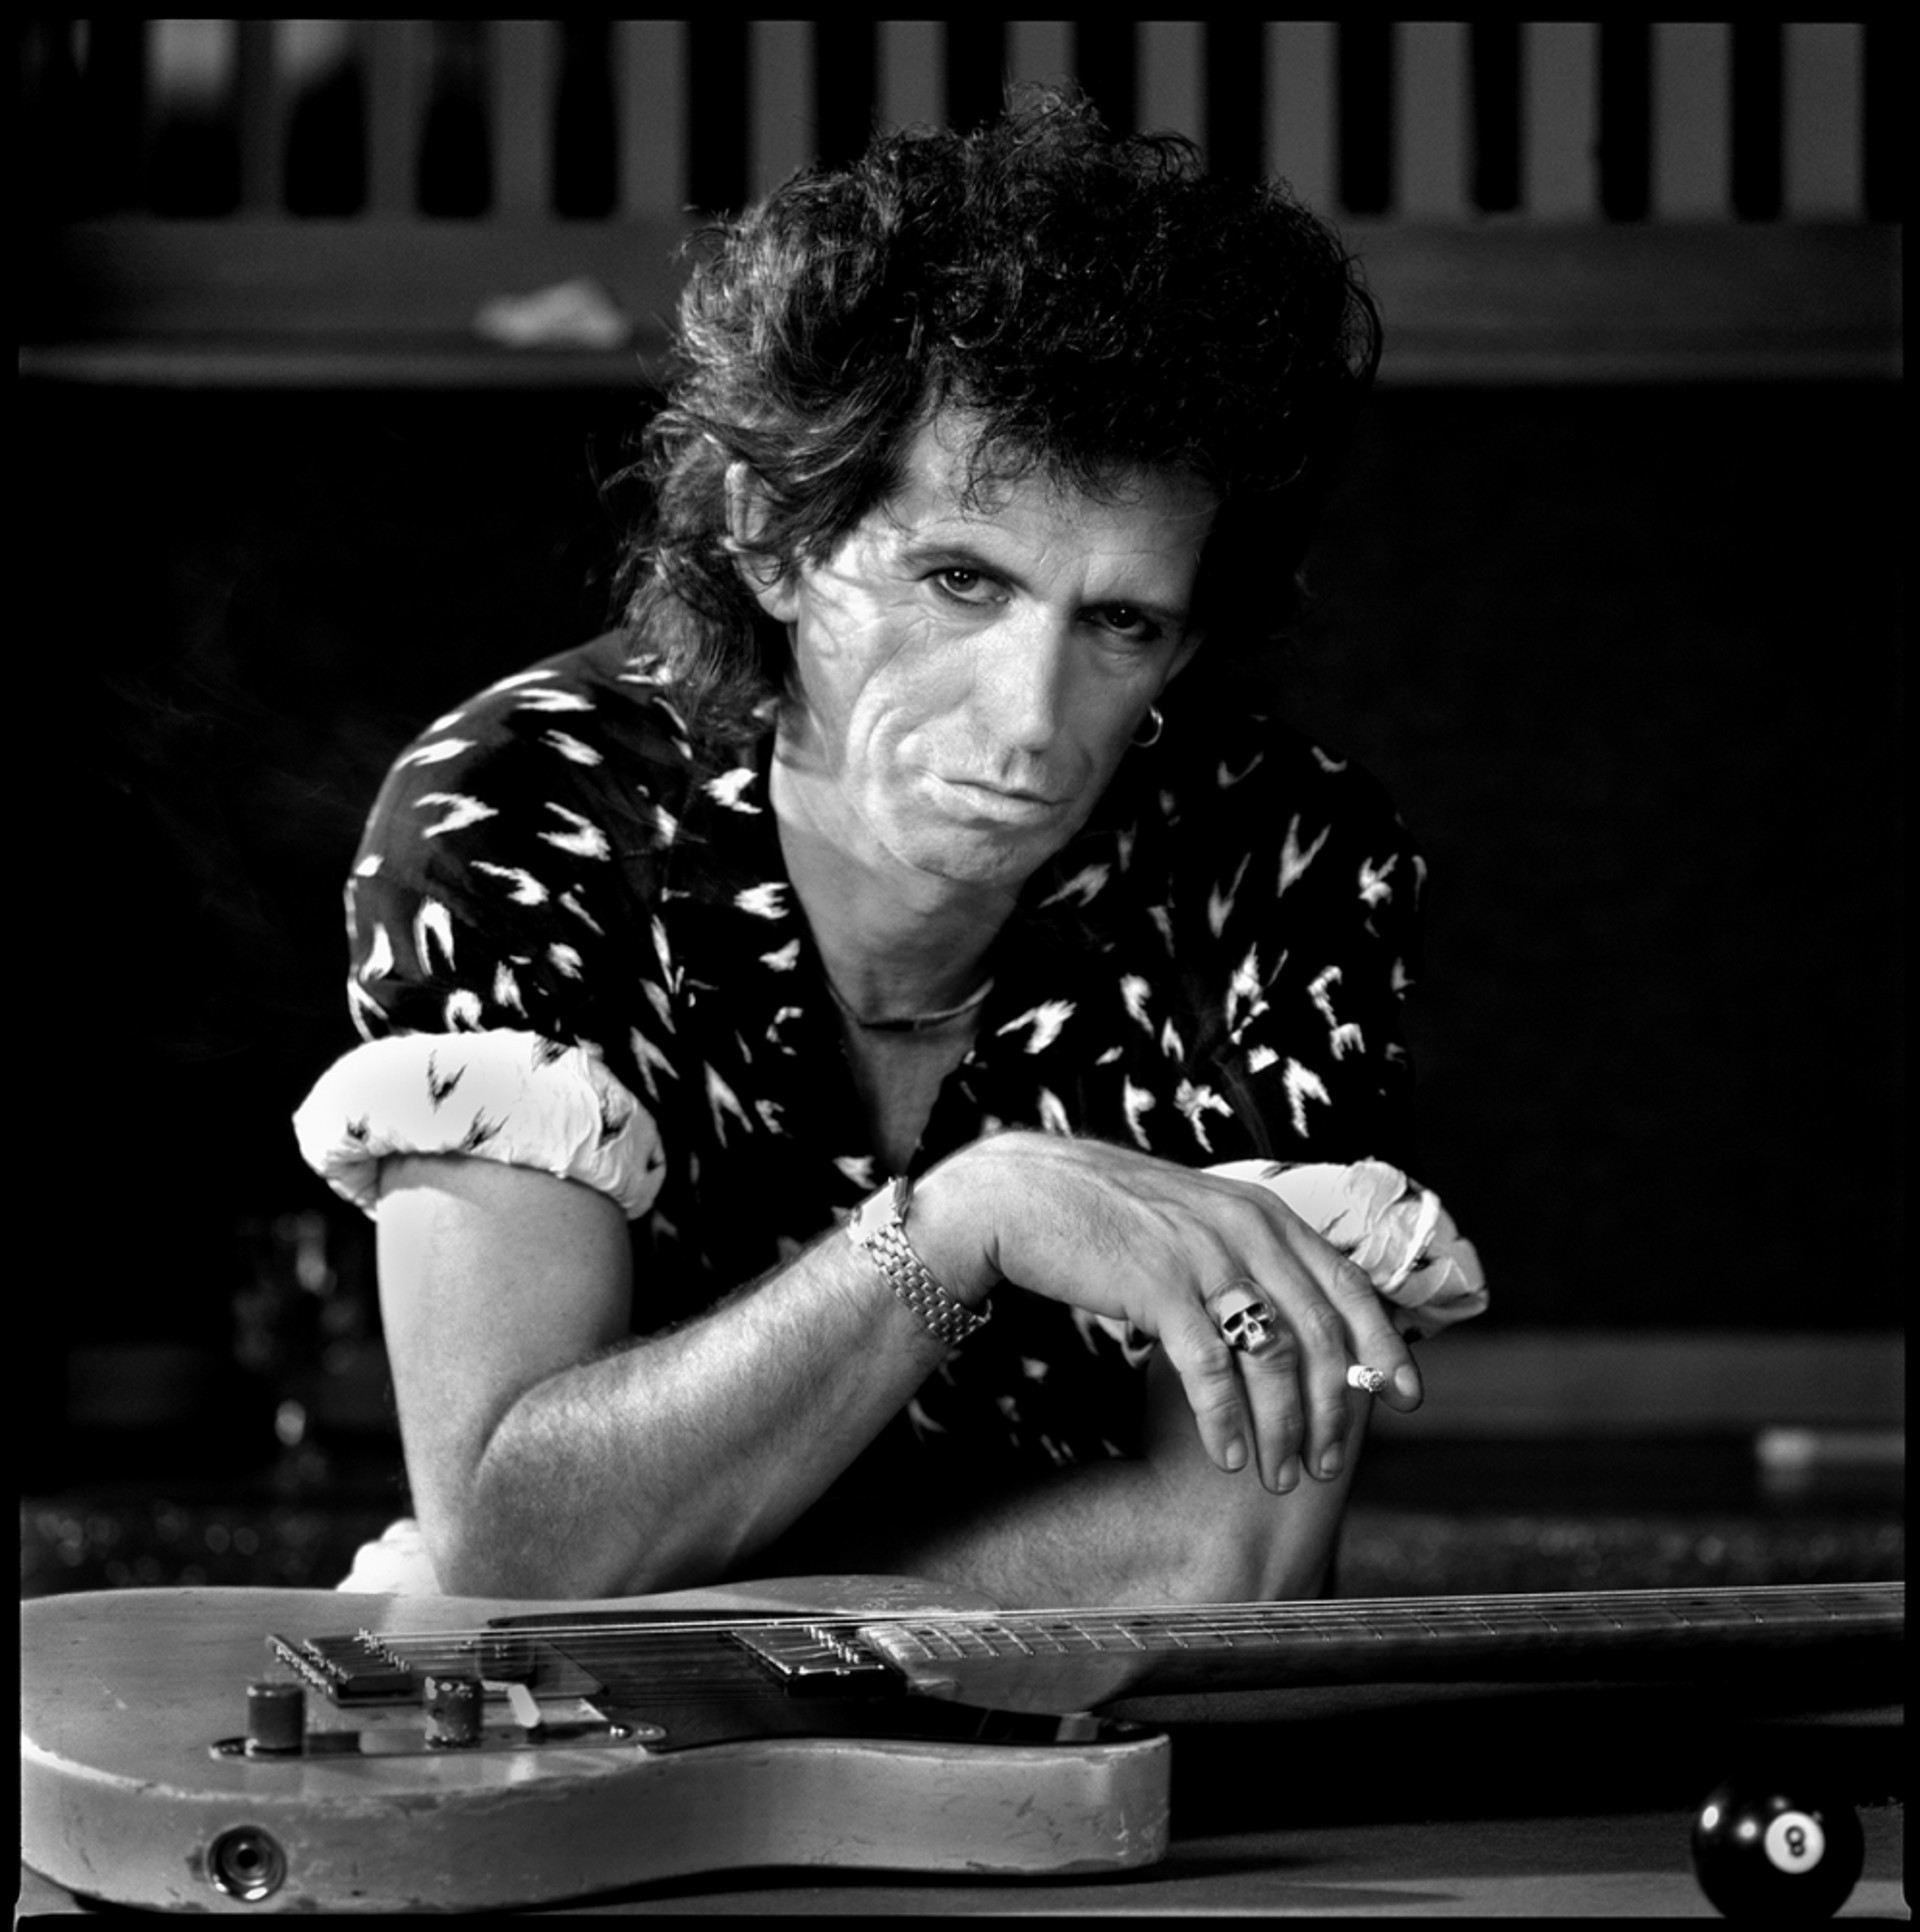 88146 Keith Richards Pool Table BW by Timothy White